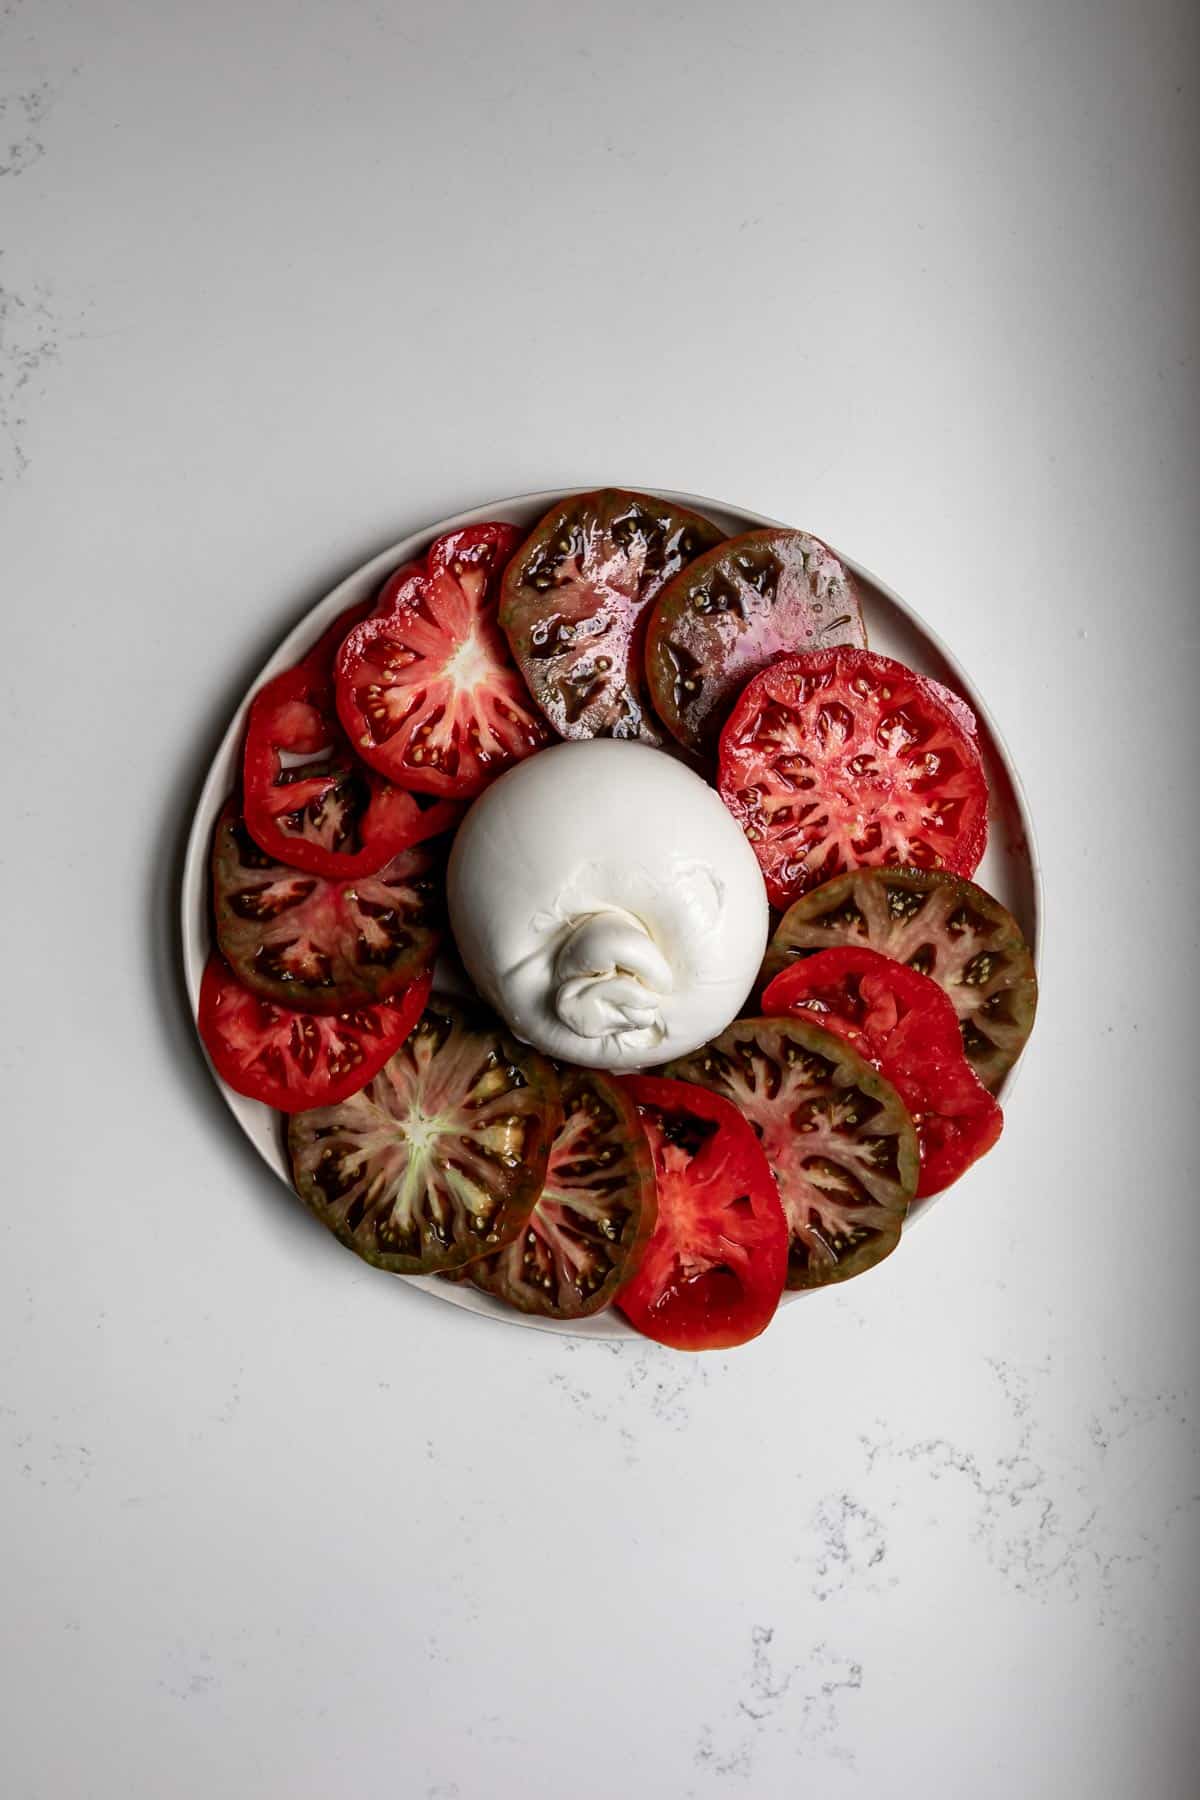 Ball of burrata cheese surrounded by sliced heirloom tomatoes on a white plate with while marble background.